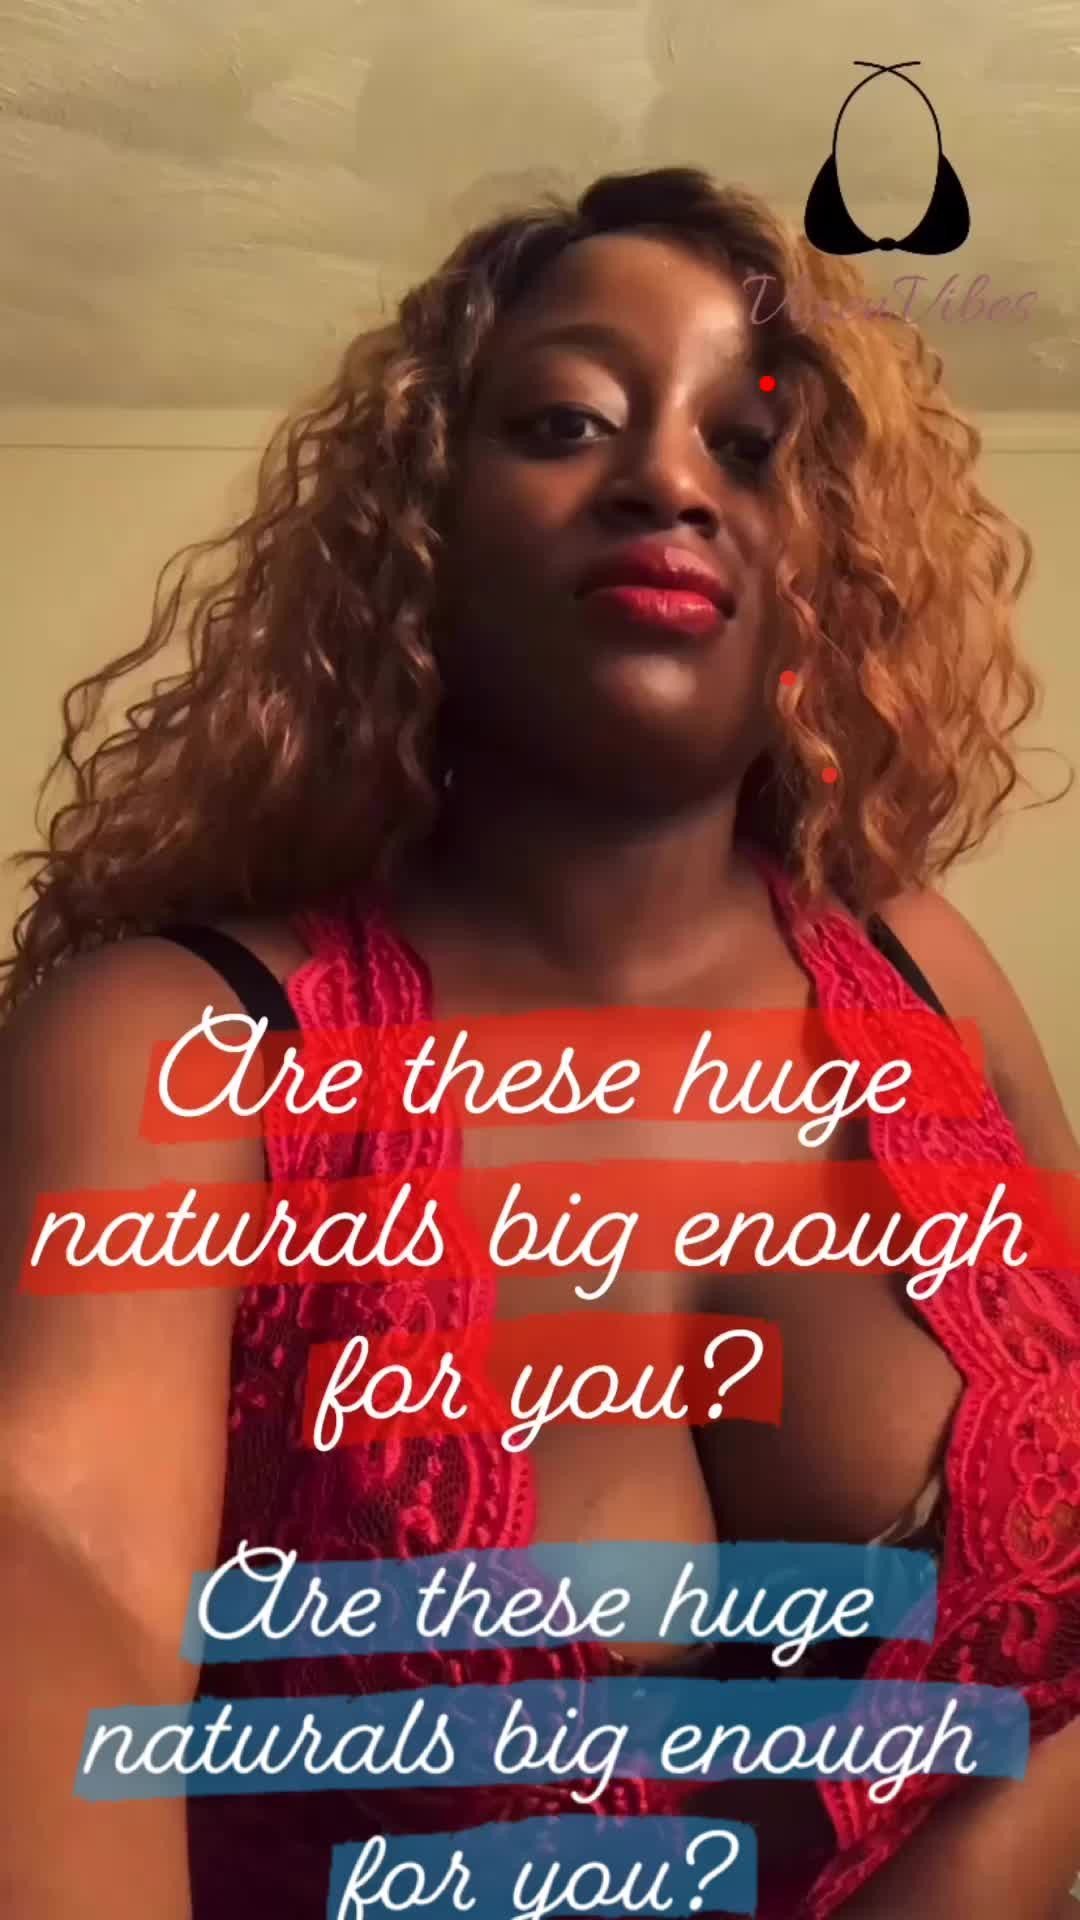 Video post by VixenVibes